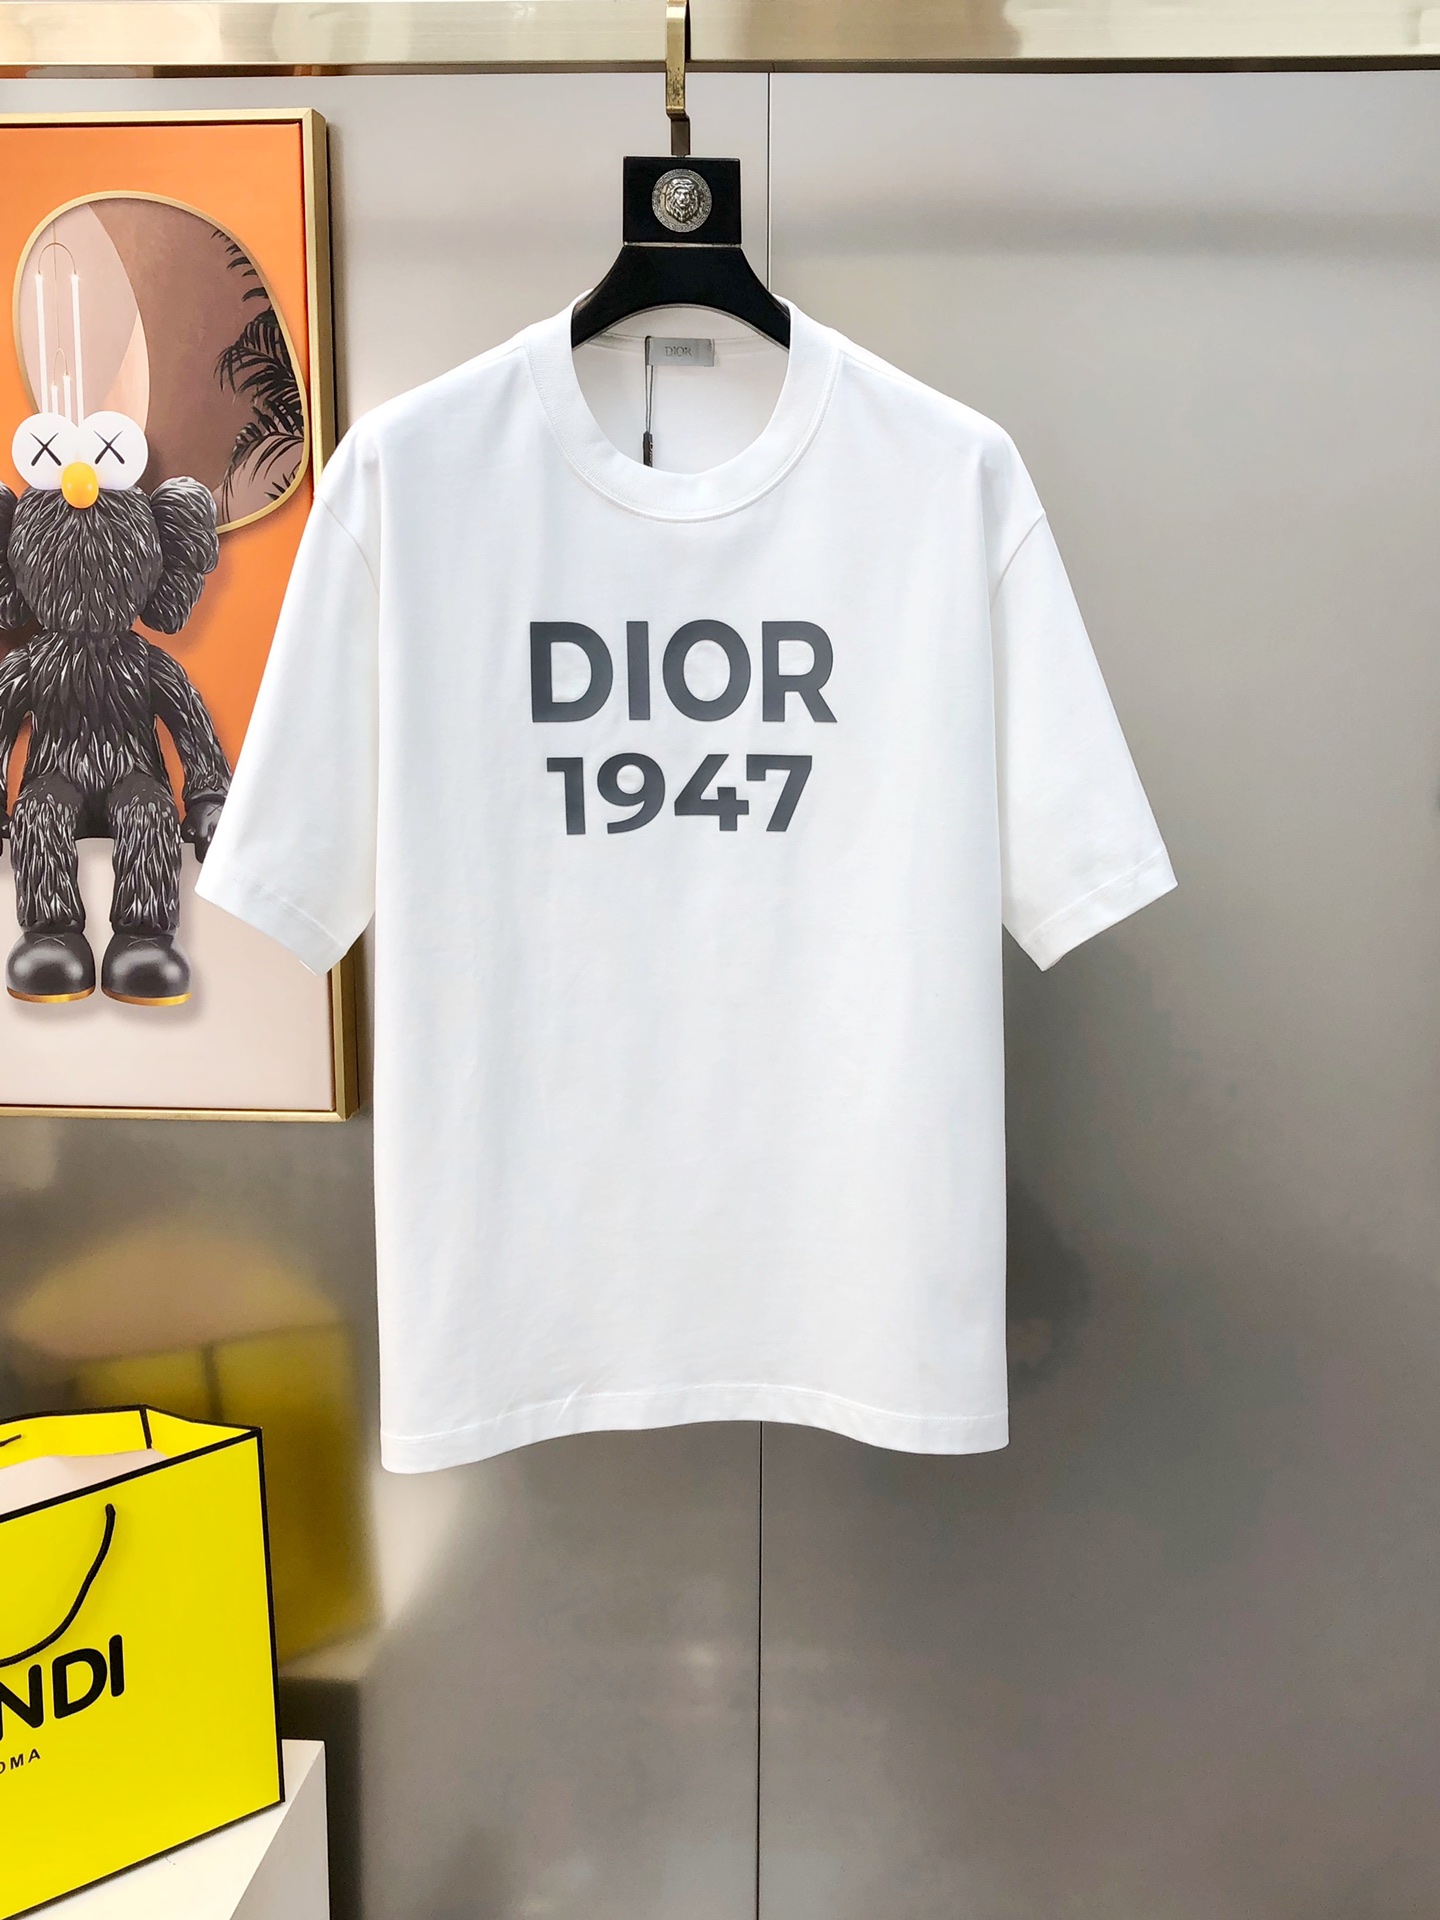 Dior Clothing T-Shirt Black White Men Cotton Spring/Summer Collection Short Sleeve